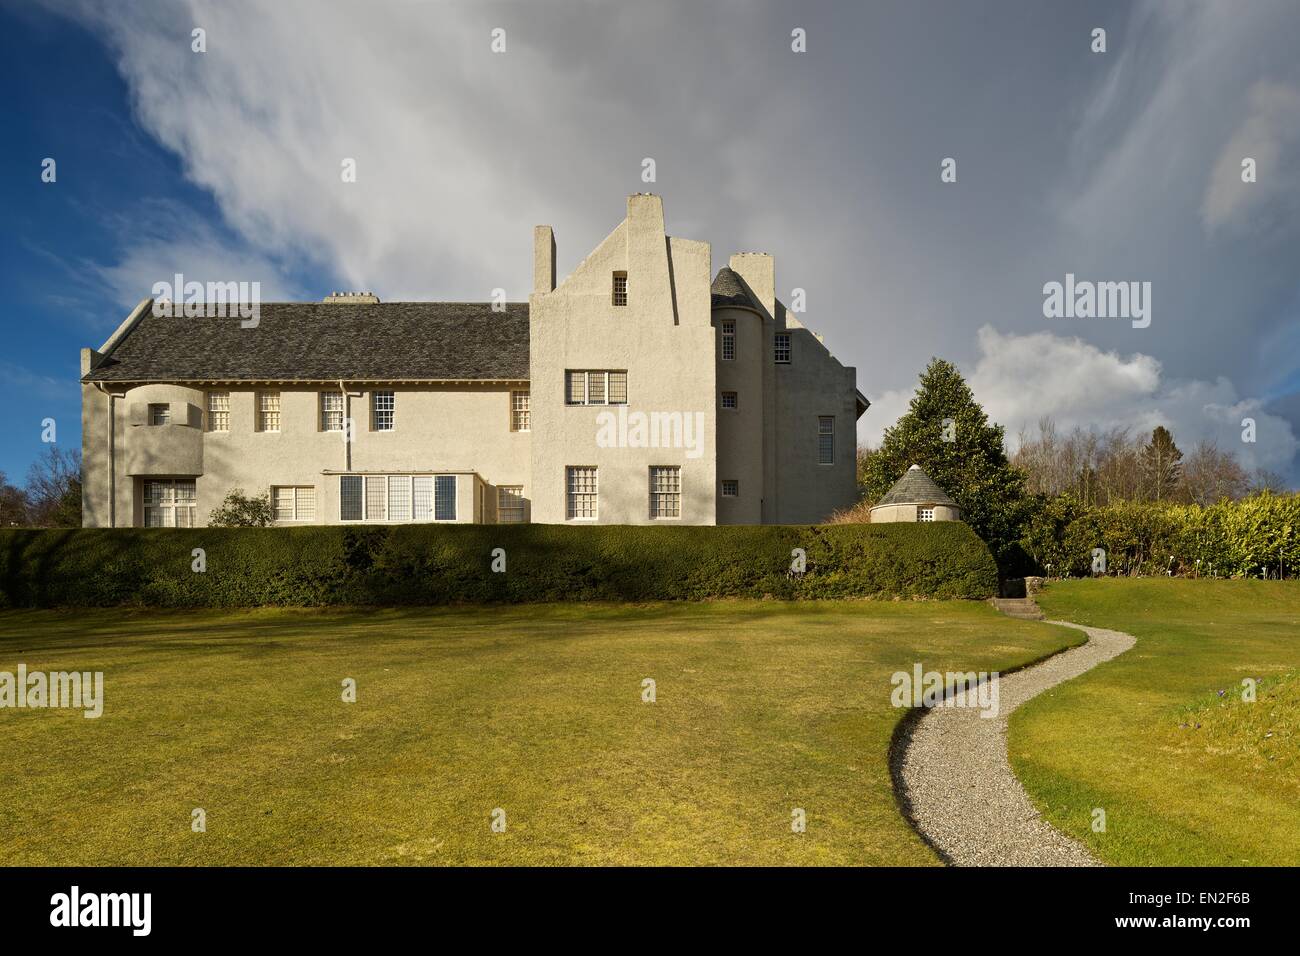 A colour image of Hill House in Helensburgh taken with a strong brooding cloud behind it Stock Photo